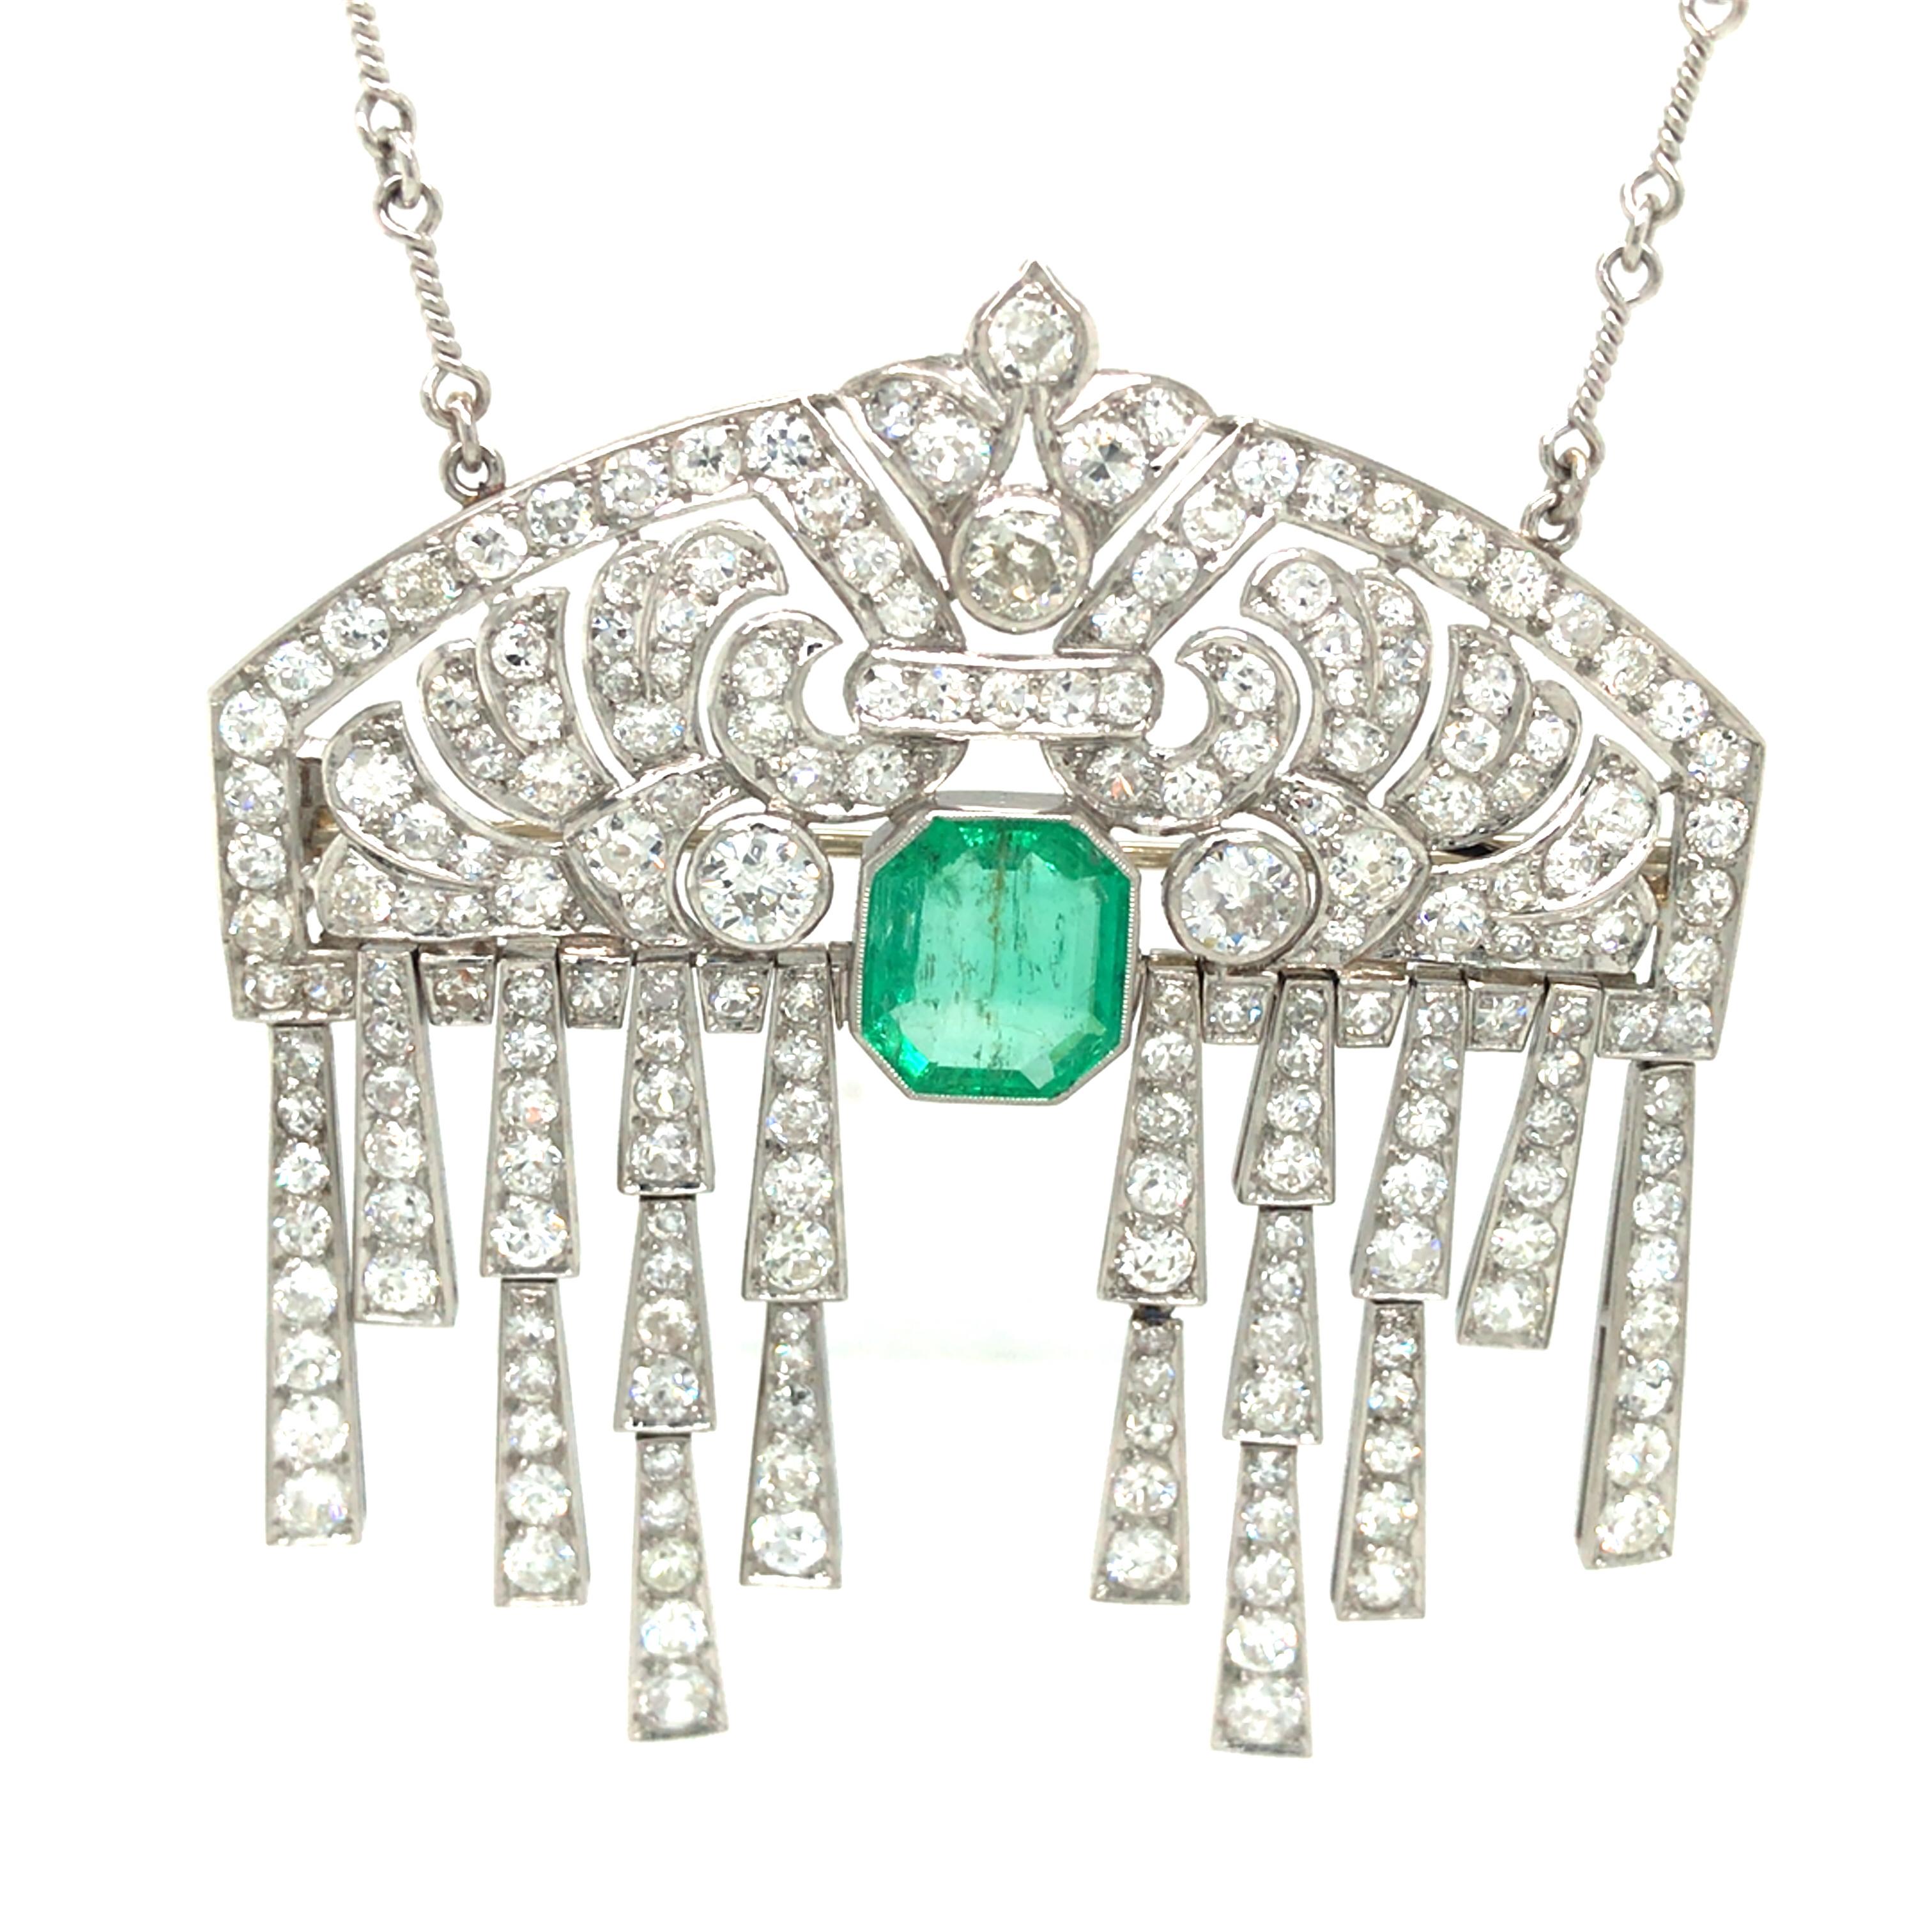 Platinum Vintage Emerald and Diamond Pendant Diamond by the Yard Necklace. 3.80 Carat Emerald Gemstone is expertly set with Round Brilliant Cut Diamonds weighing 15.07 carat total weight, G-I in color and VS-I1 in clarity set in the Pendant and